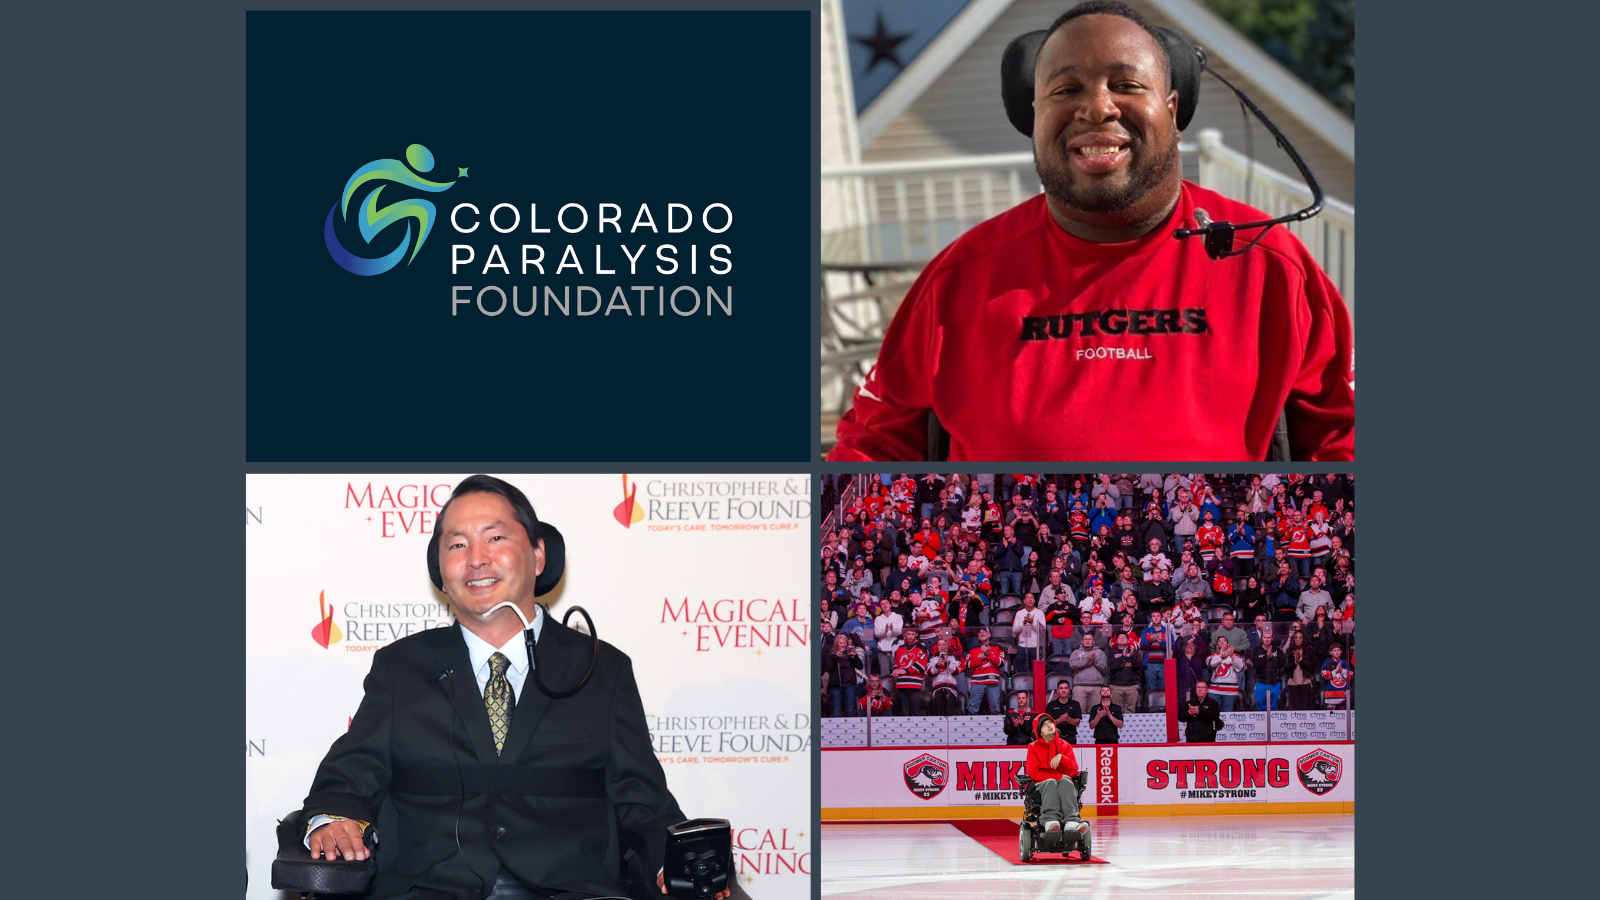 Colorado Paralysis Foundation logo, with photos of Eric LeGrand, Dr. Rex Marco, and Mike Nichols